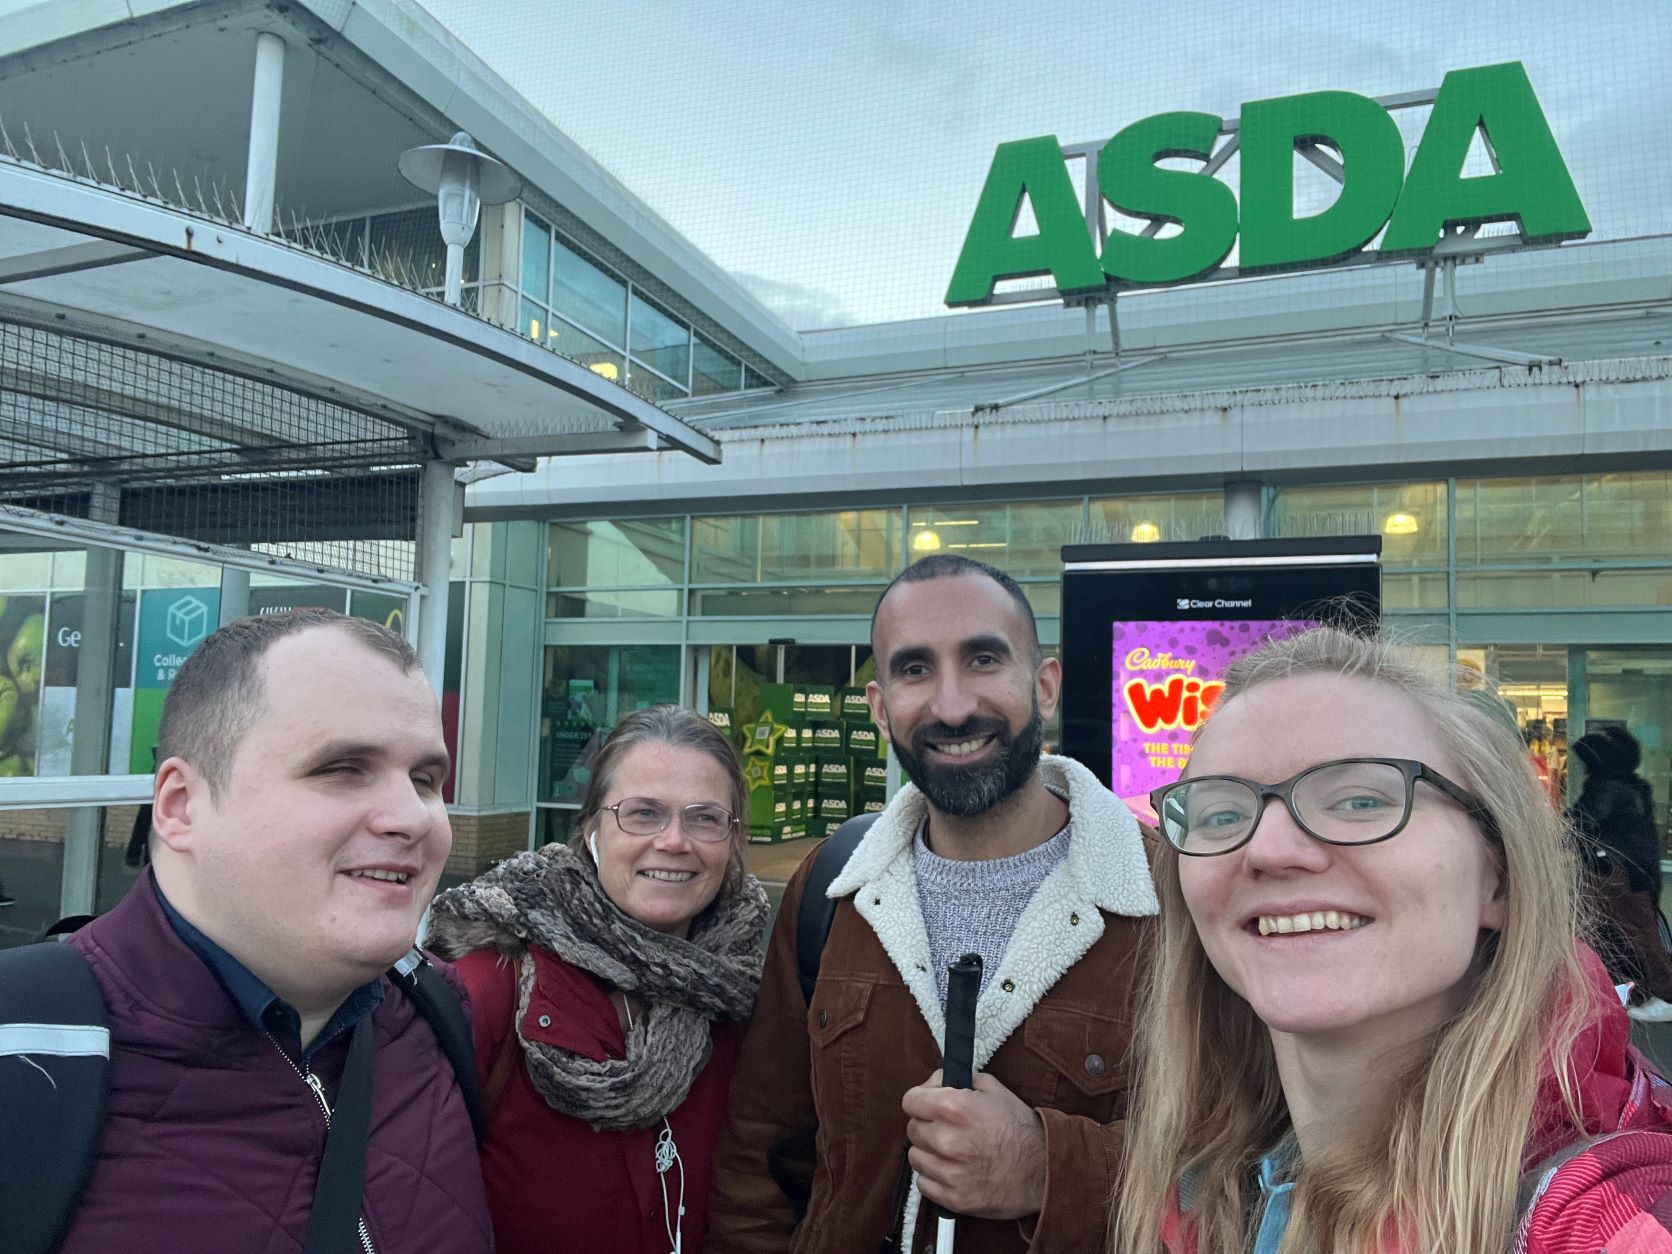 London SLC outside ASDA Wembley. From left to right, Hubert, Tech Team Intern at TPT, Vicky and Davinder, London SLC members, and Lucy Williams, Senior Manager for the South.